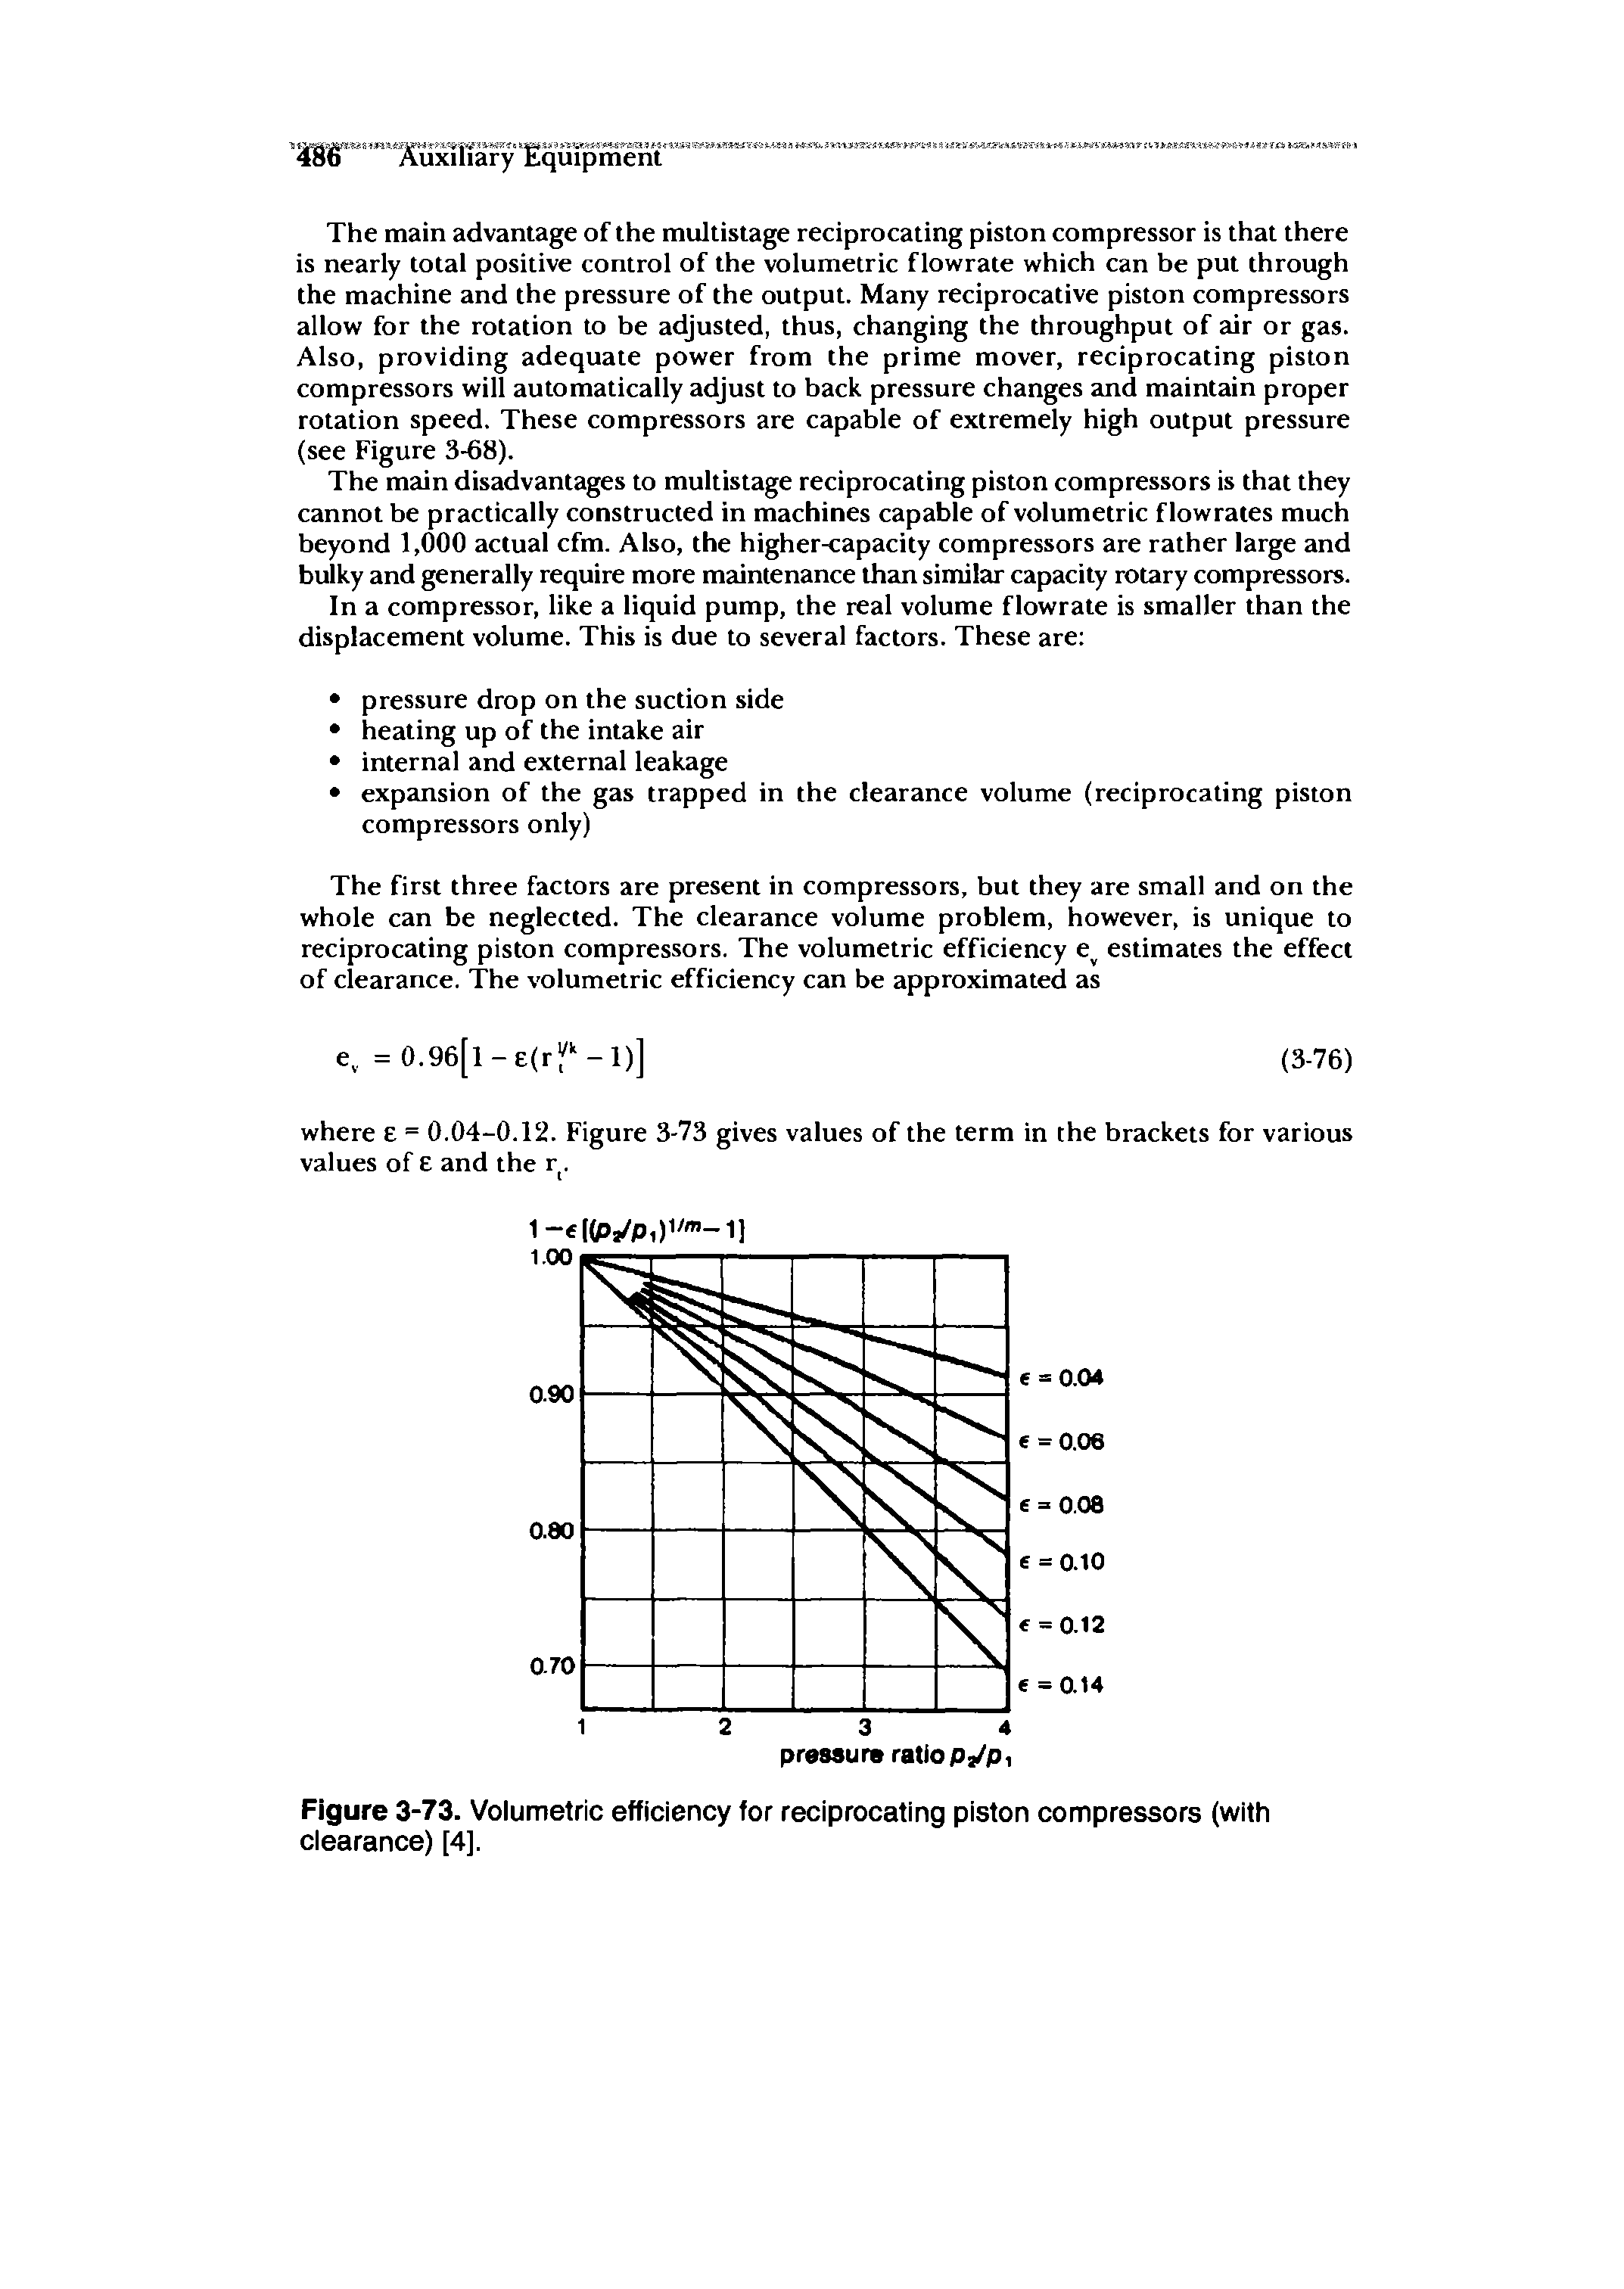 Figure 3-73. Volumetric efficiency for reciprocating piston compressors (with ciearance) [4].